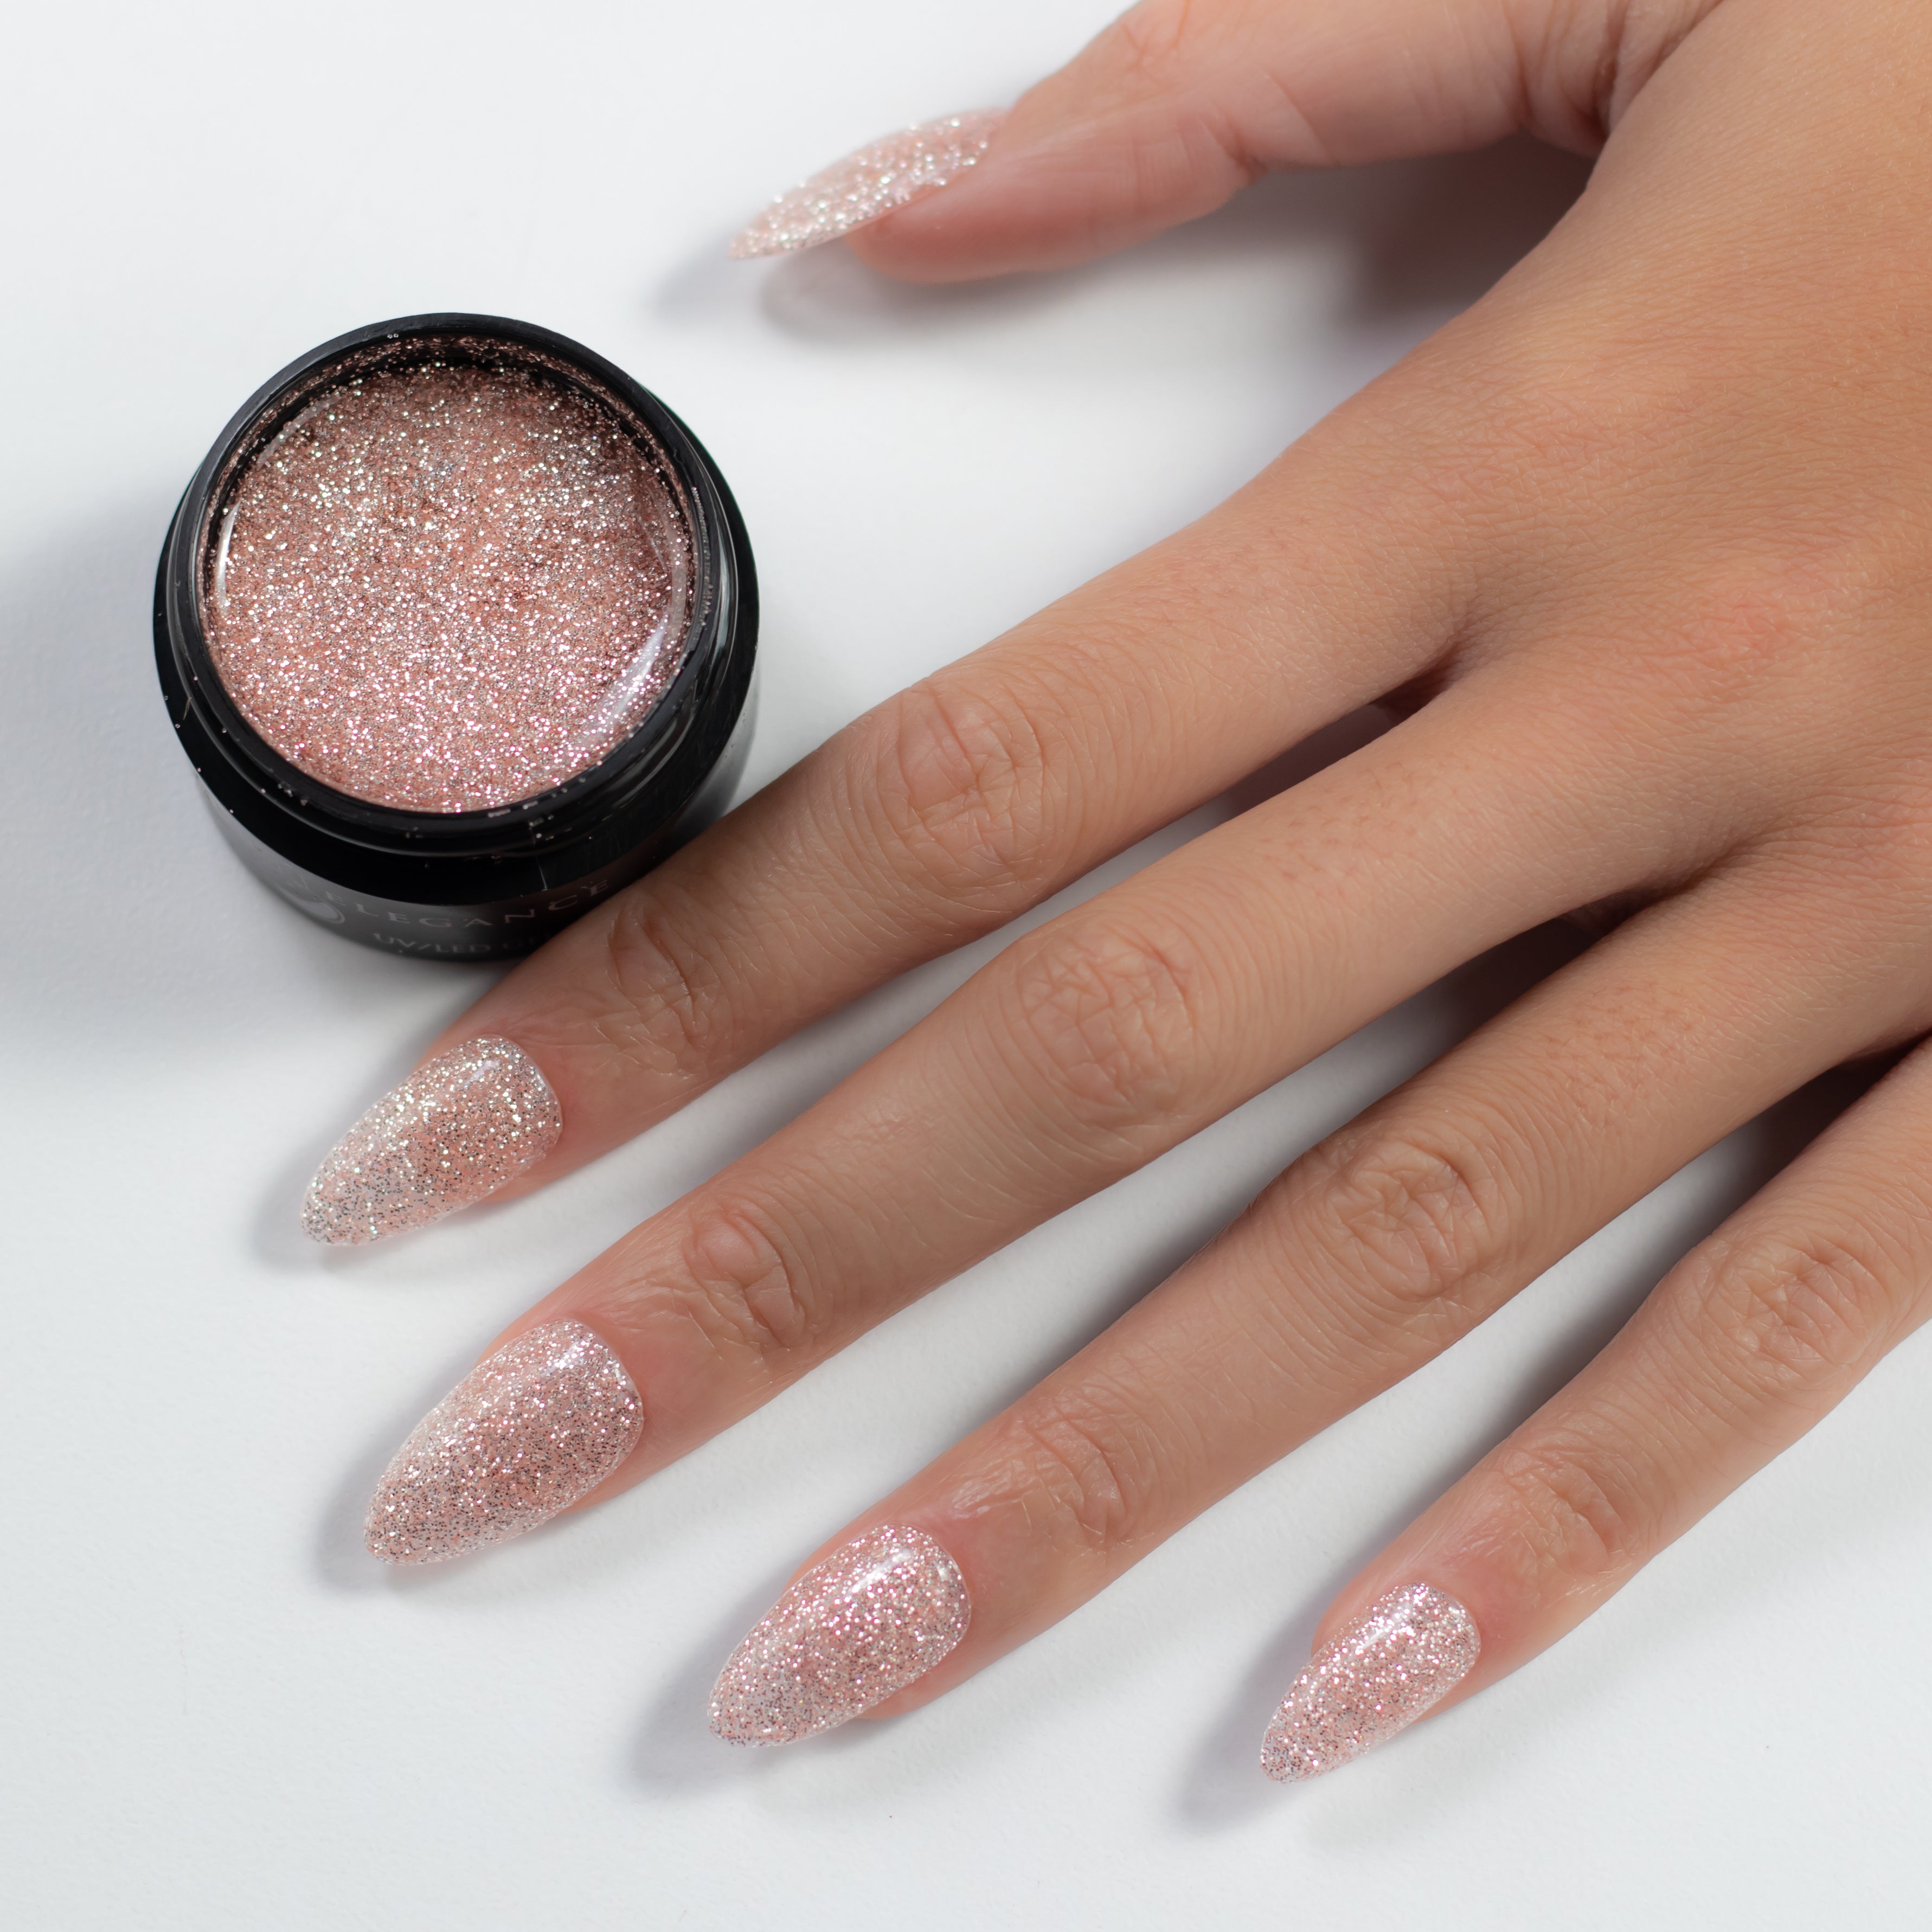 MILANI One Coat Glitter - Pink Flare - Reviews | MakeupAlley